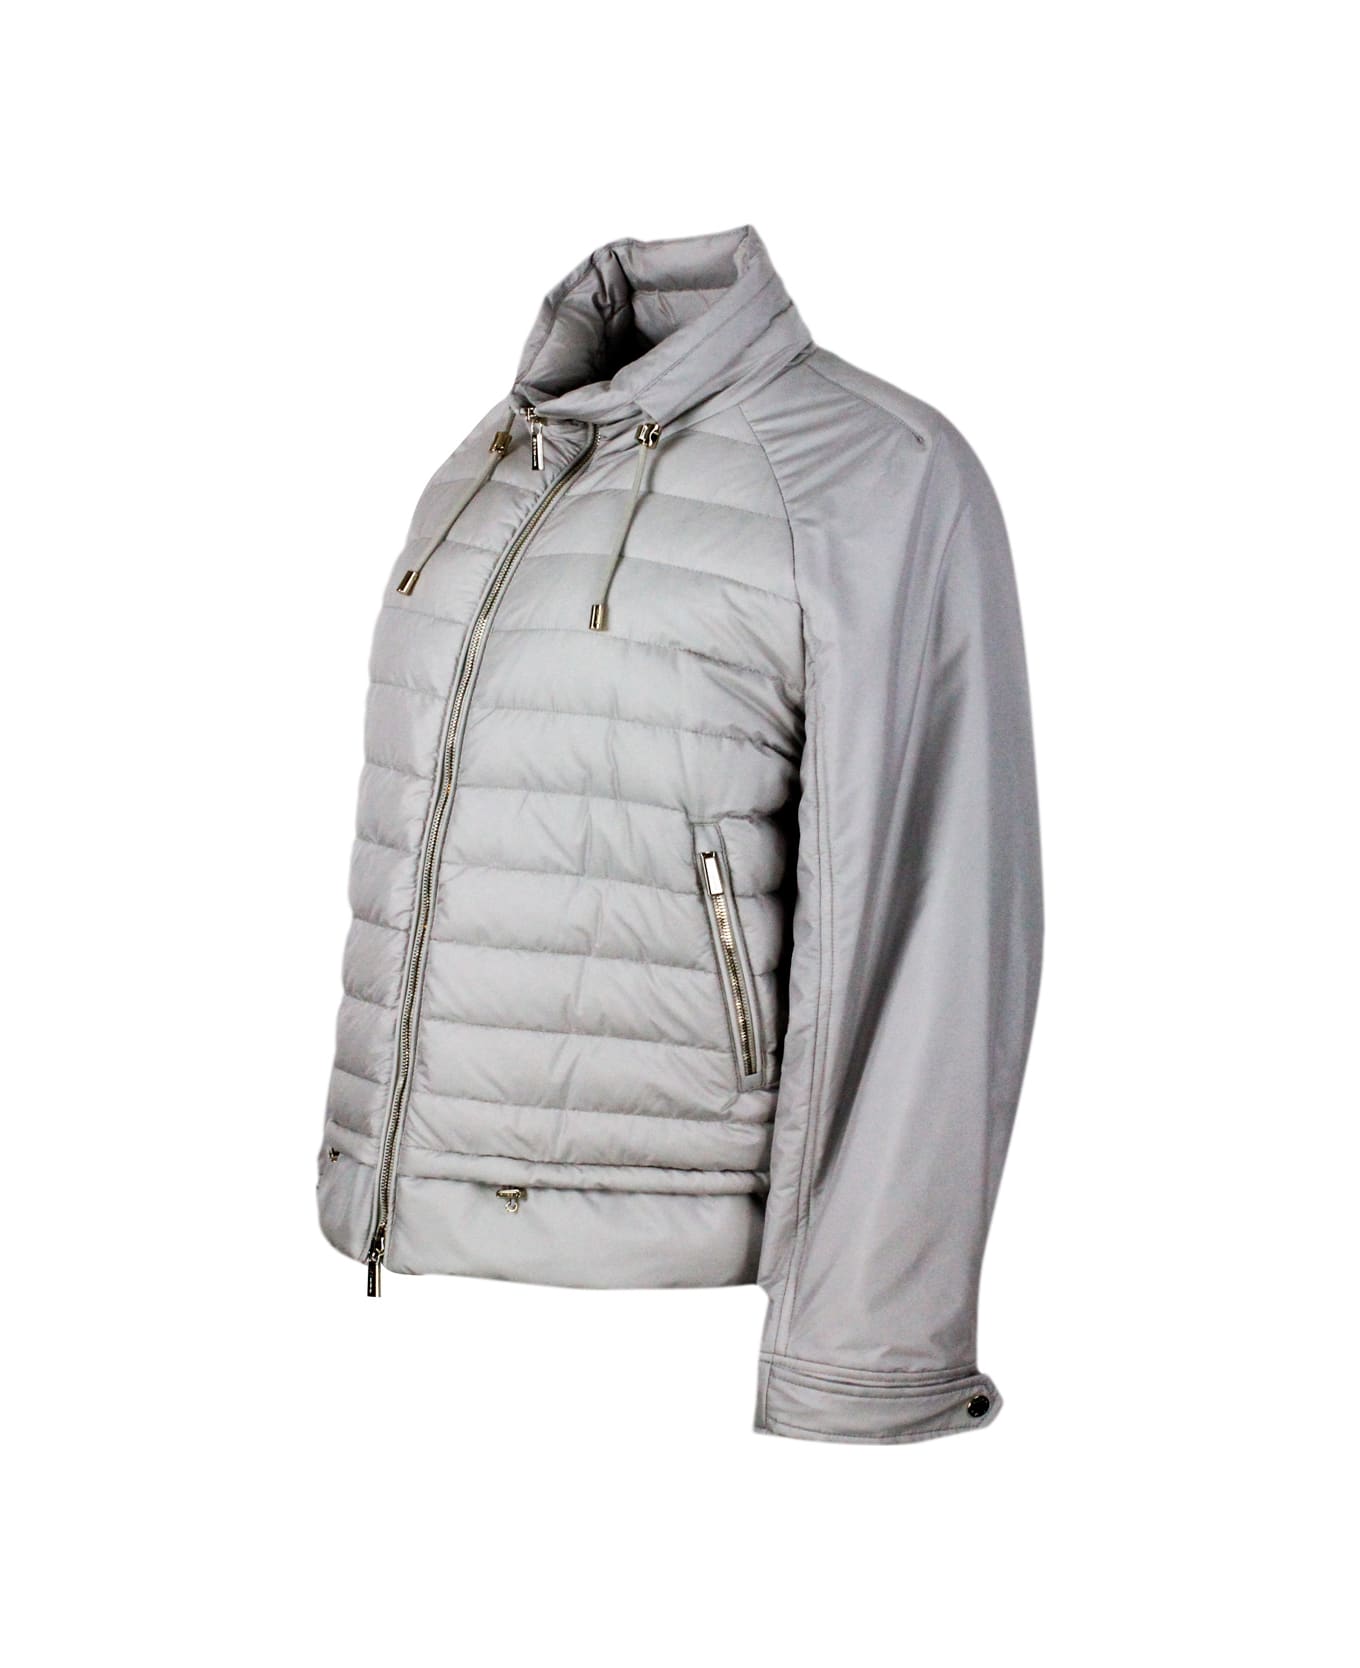 Moorer Lightweight 100 row Fine Down Jacket With An A-line Shape And Adjustable Drawstring At The Hem And Neck. Zip Closure - Ice